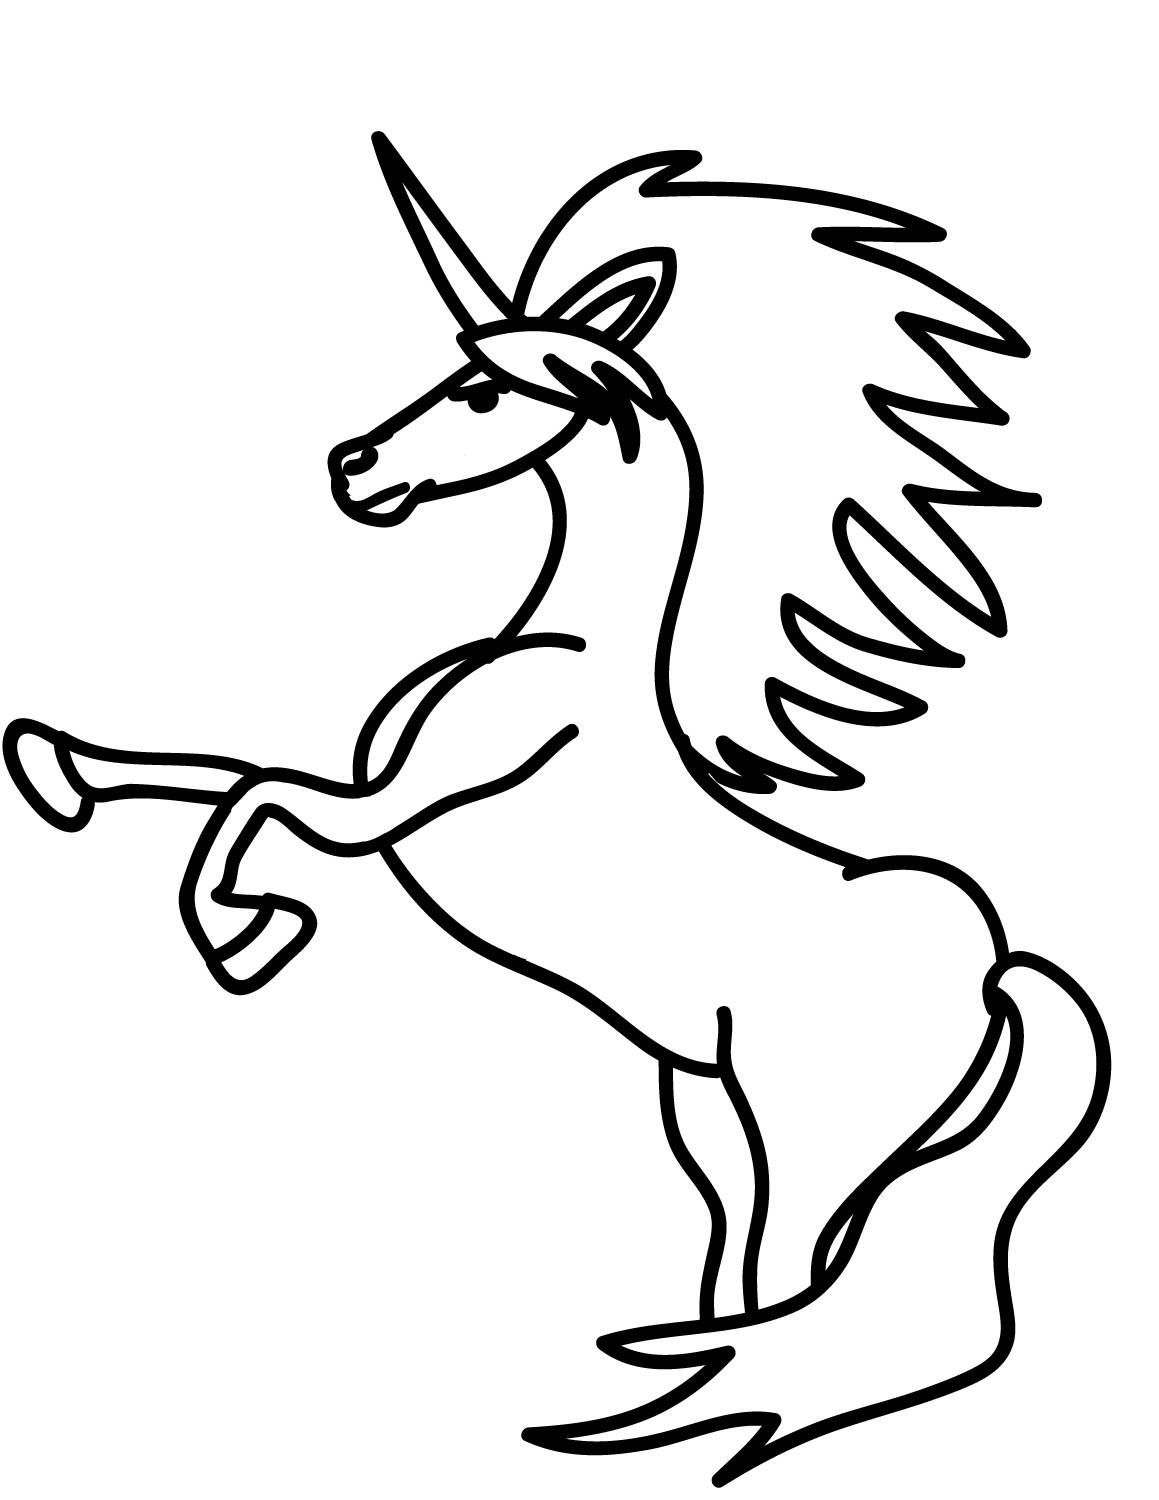 Simple Unicorn Coloring Page - Free Printable Coloring ...